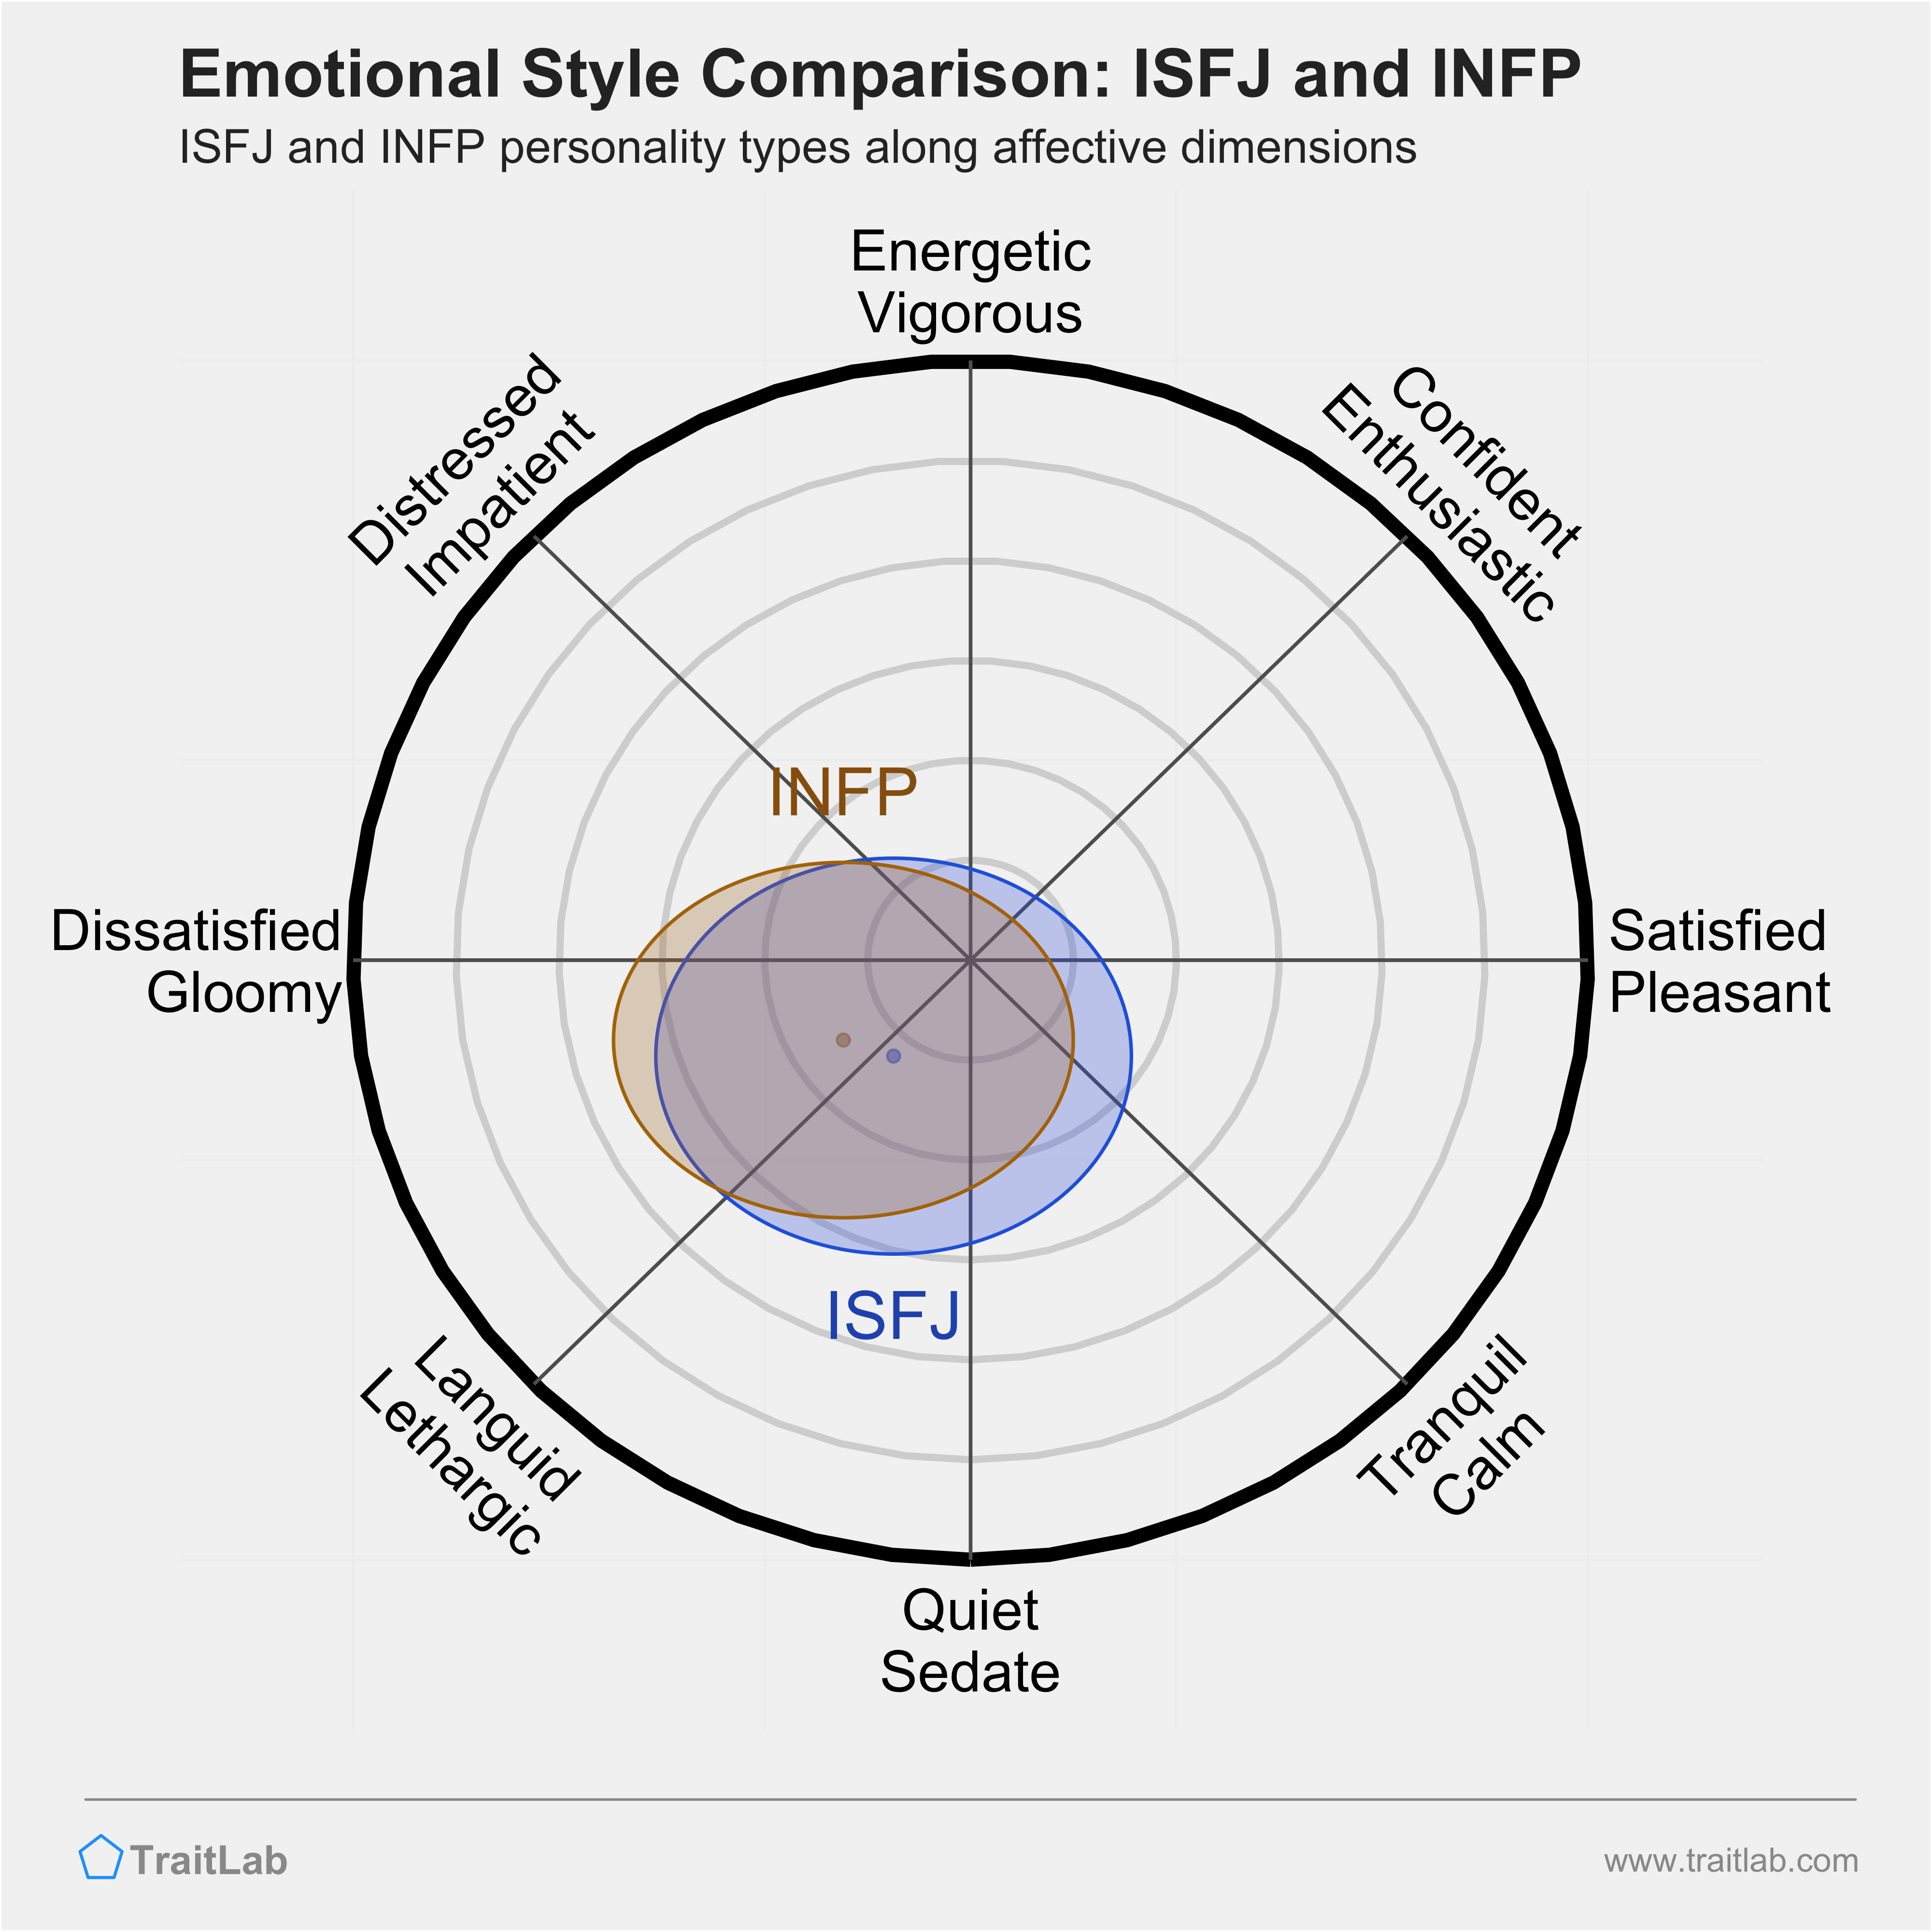 ISFJ and INFP comparison across emotional (affective) dimensions